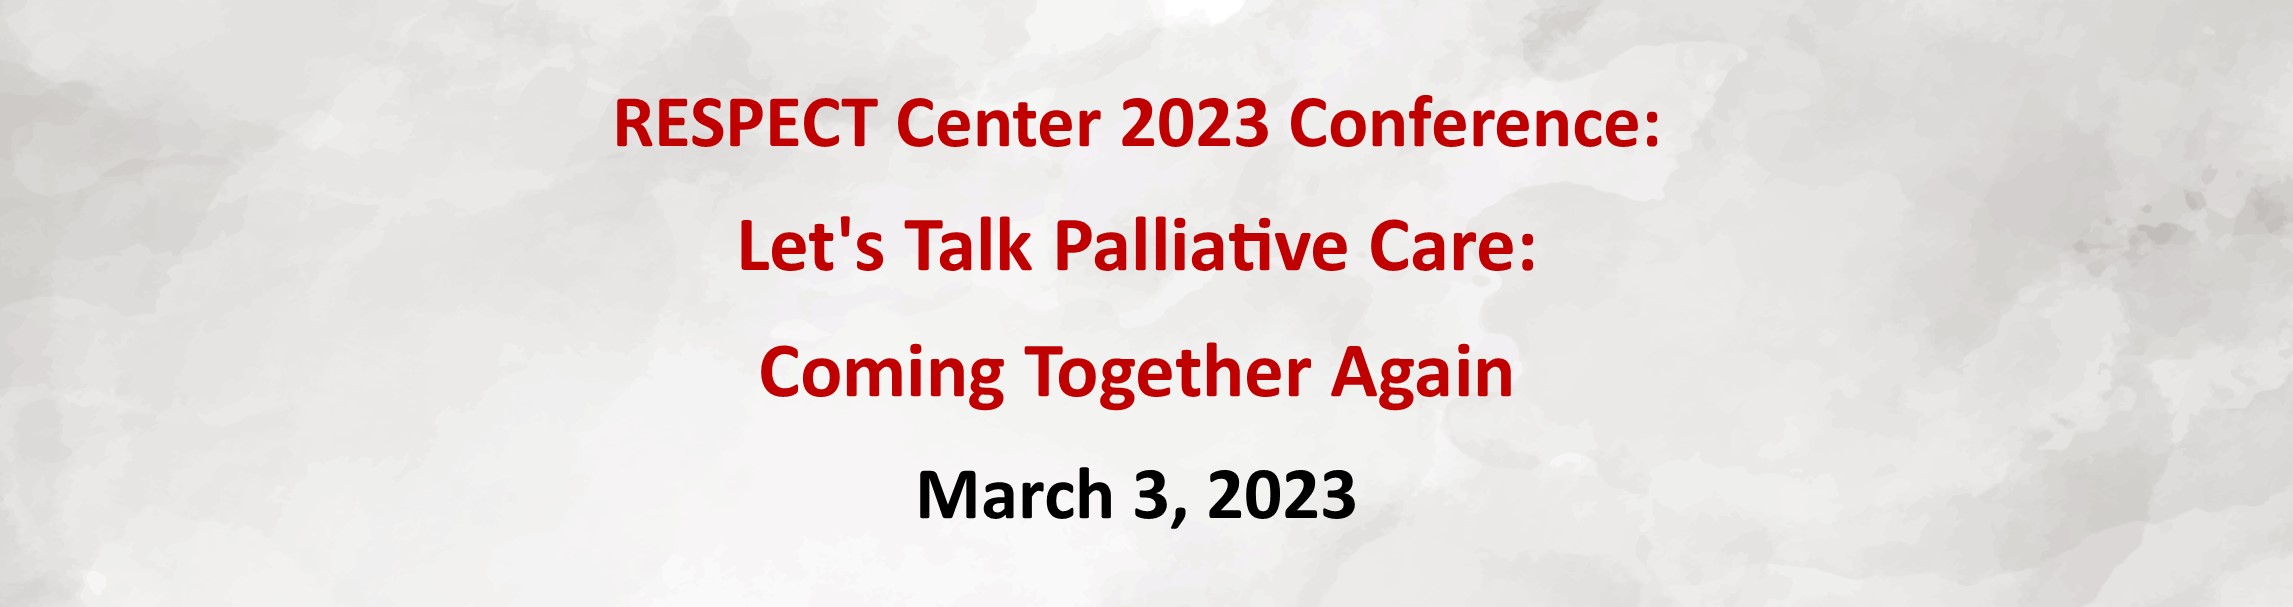 RESPECT Center 2023 Conference - Let's Talk Palliative Care : Coming Together Again Banner